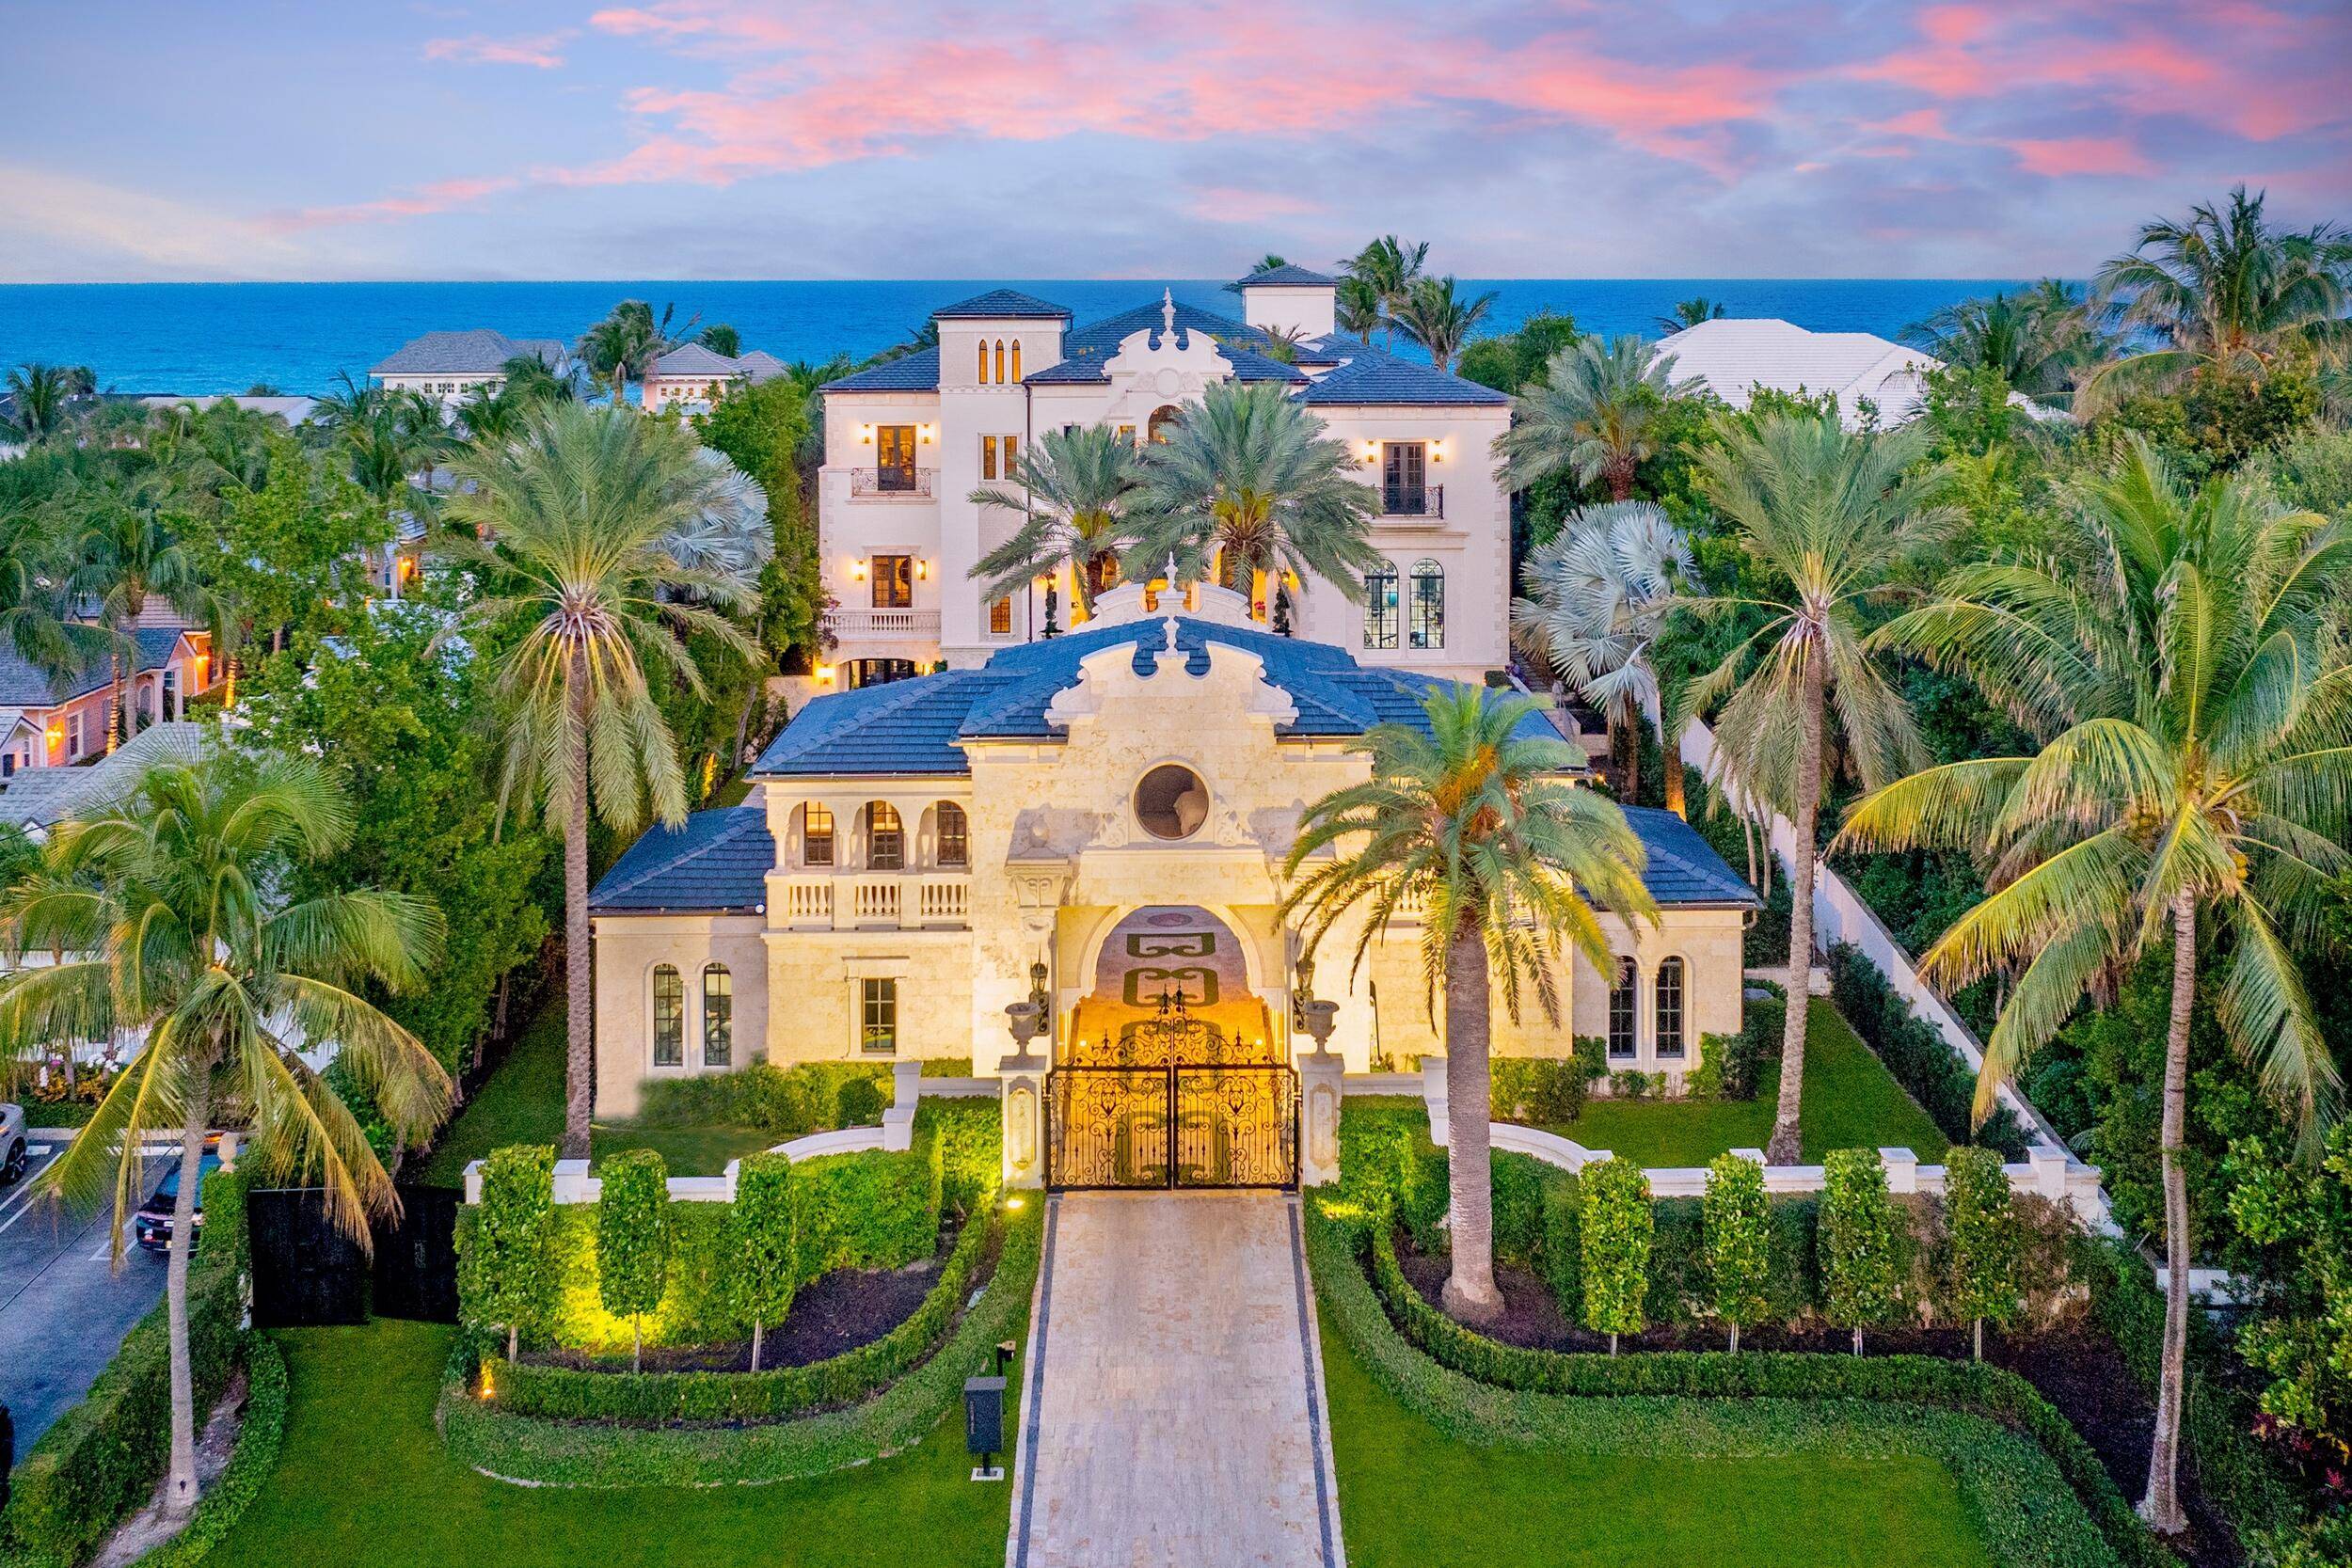 ''Mar Pietra'' stands as a bespoke palatial masterpiece, recognized as one of South Florida's finest oceanfront estates.